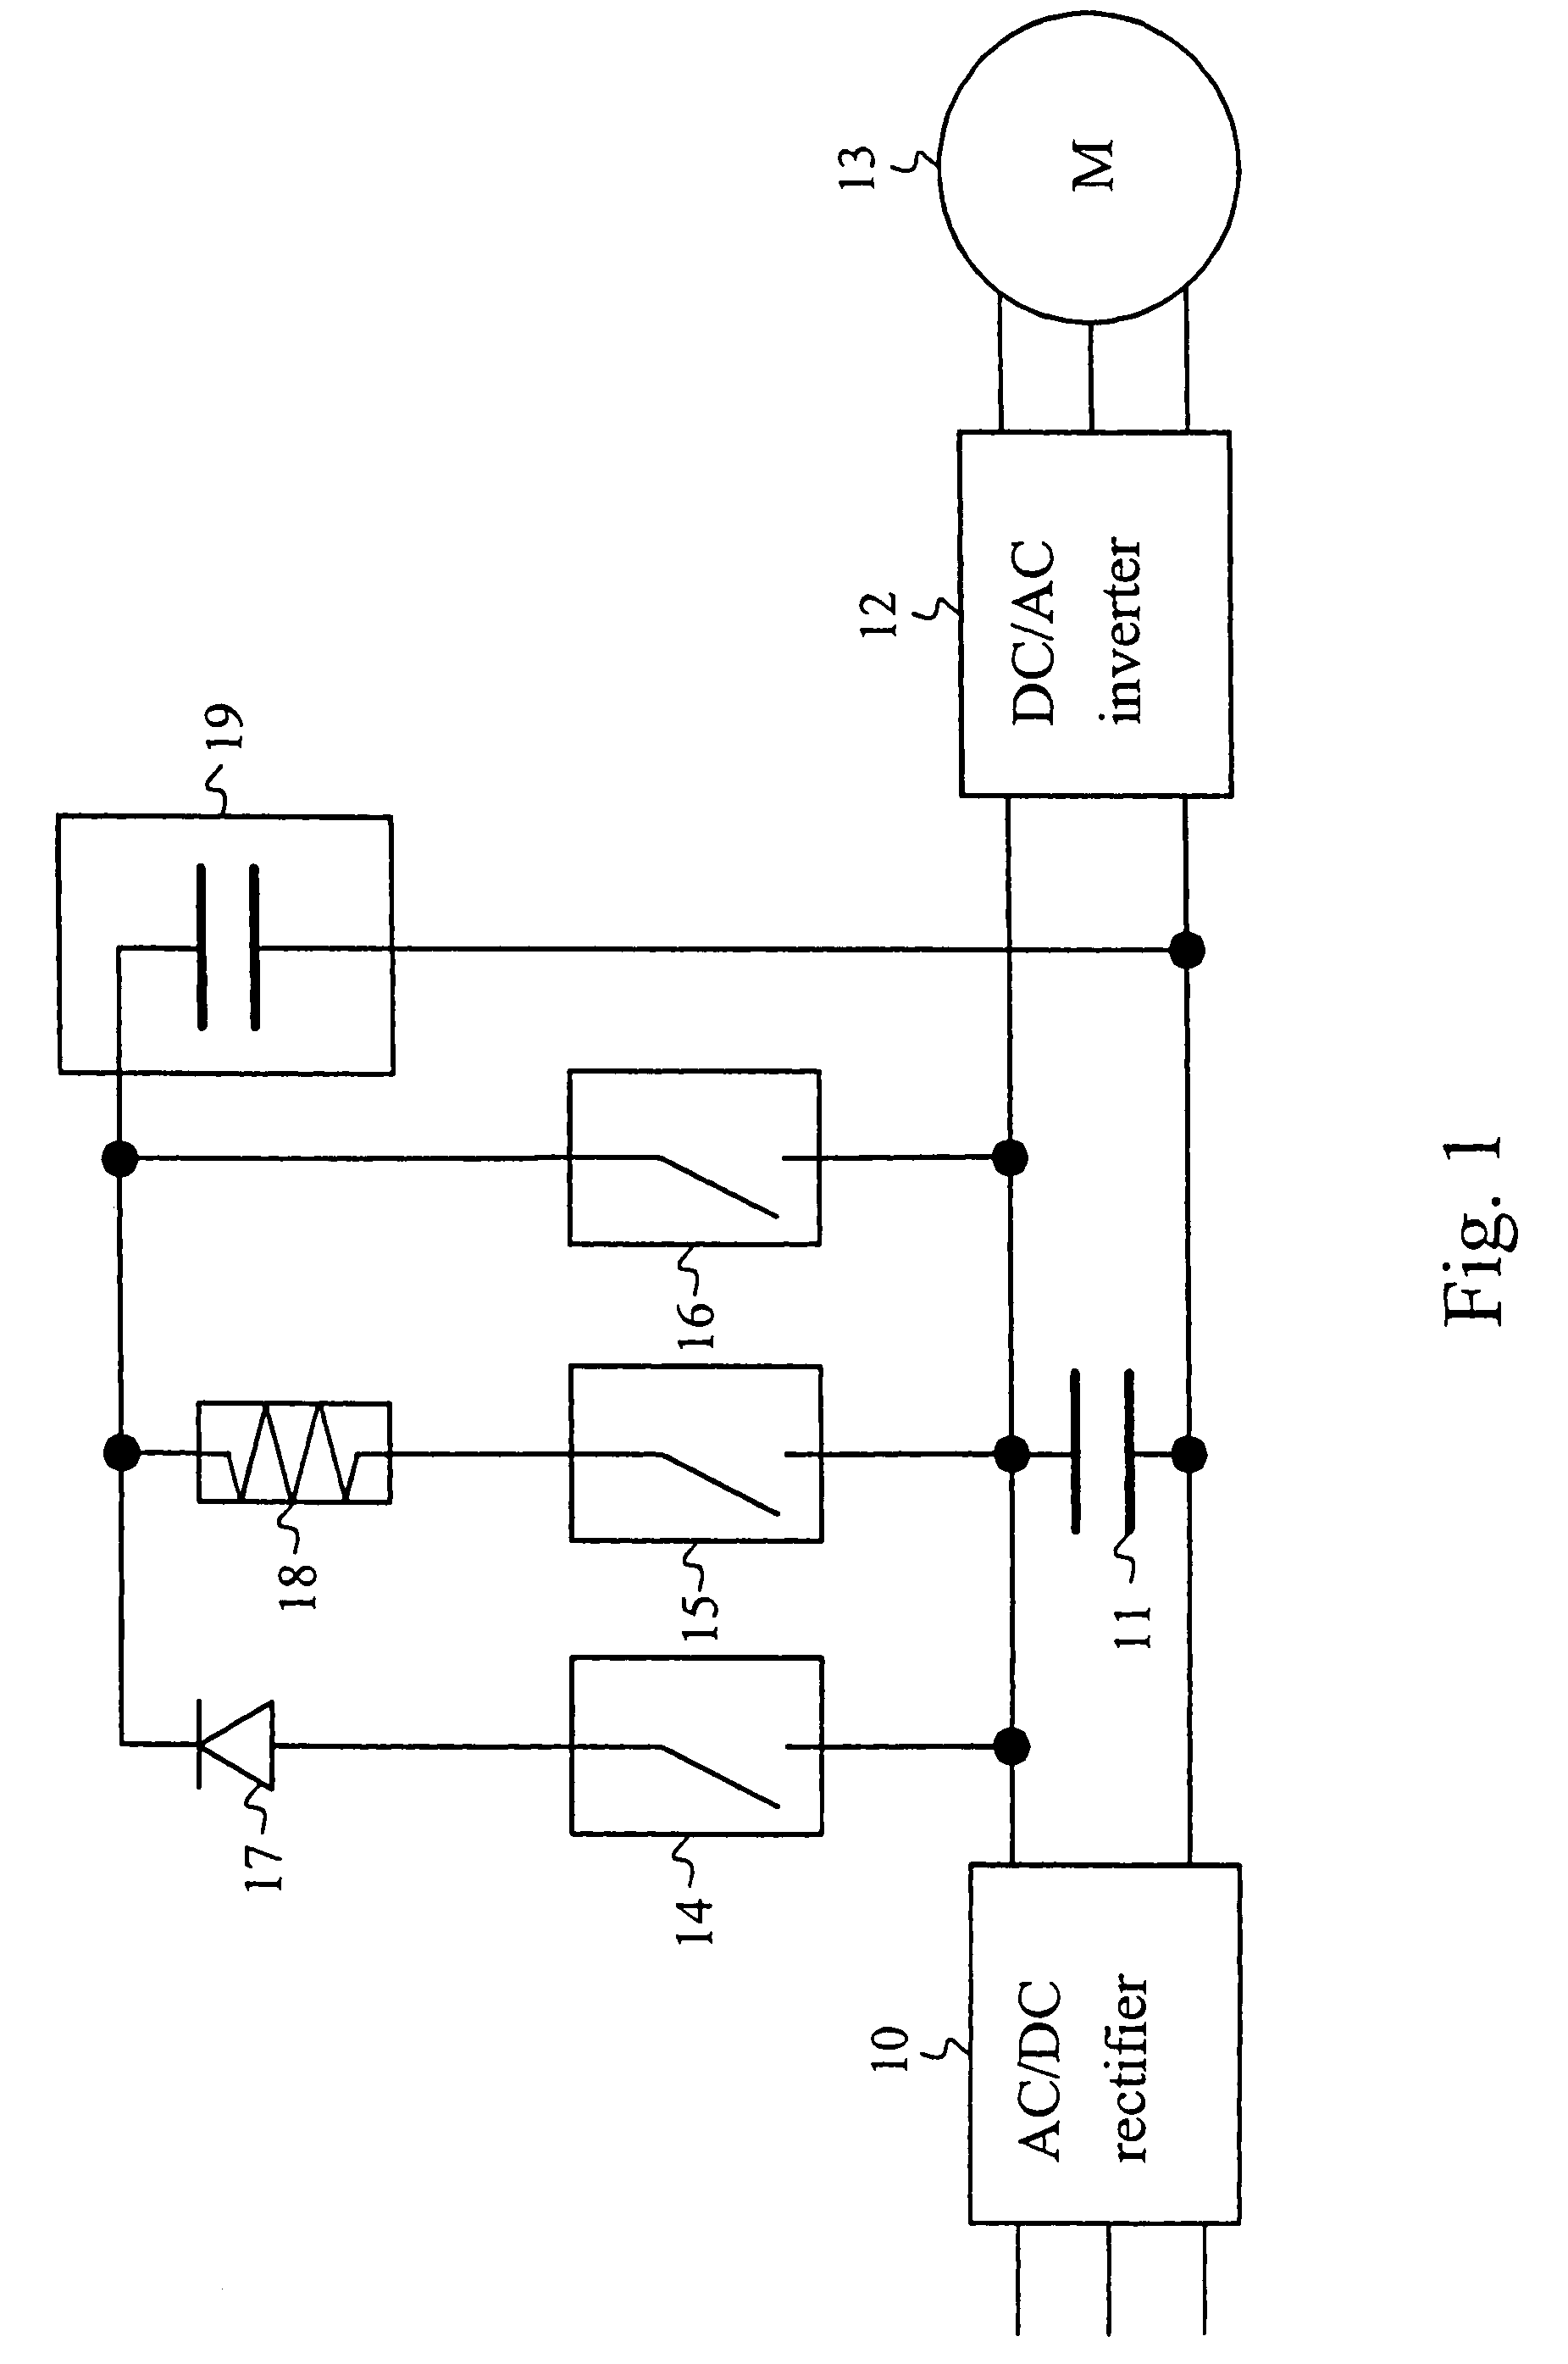 Elevator system using a supercapacitor as a backup power source